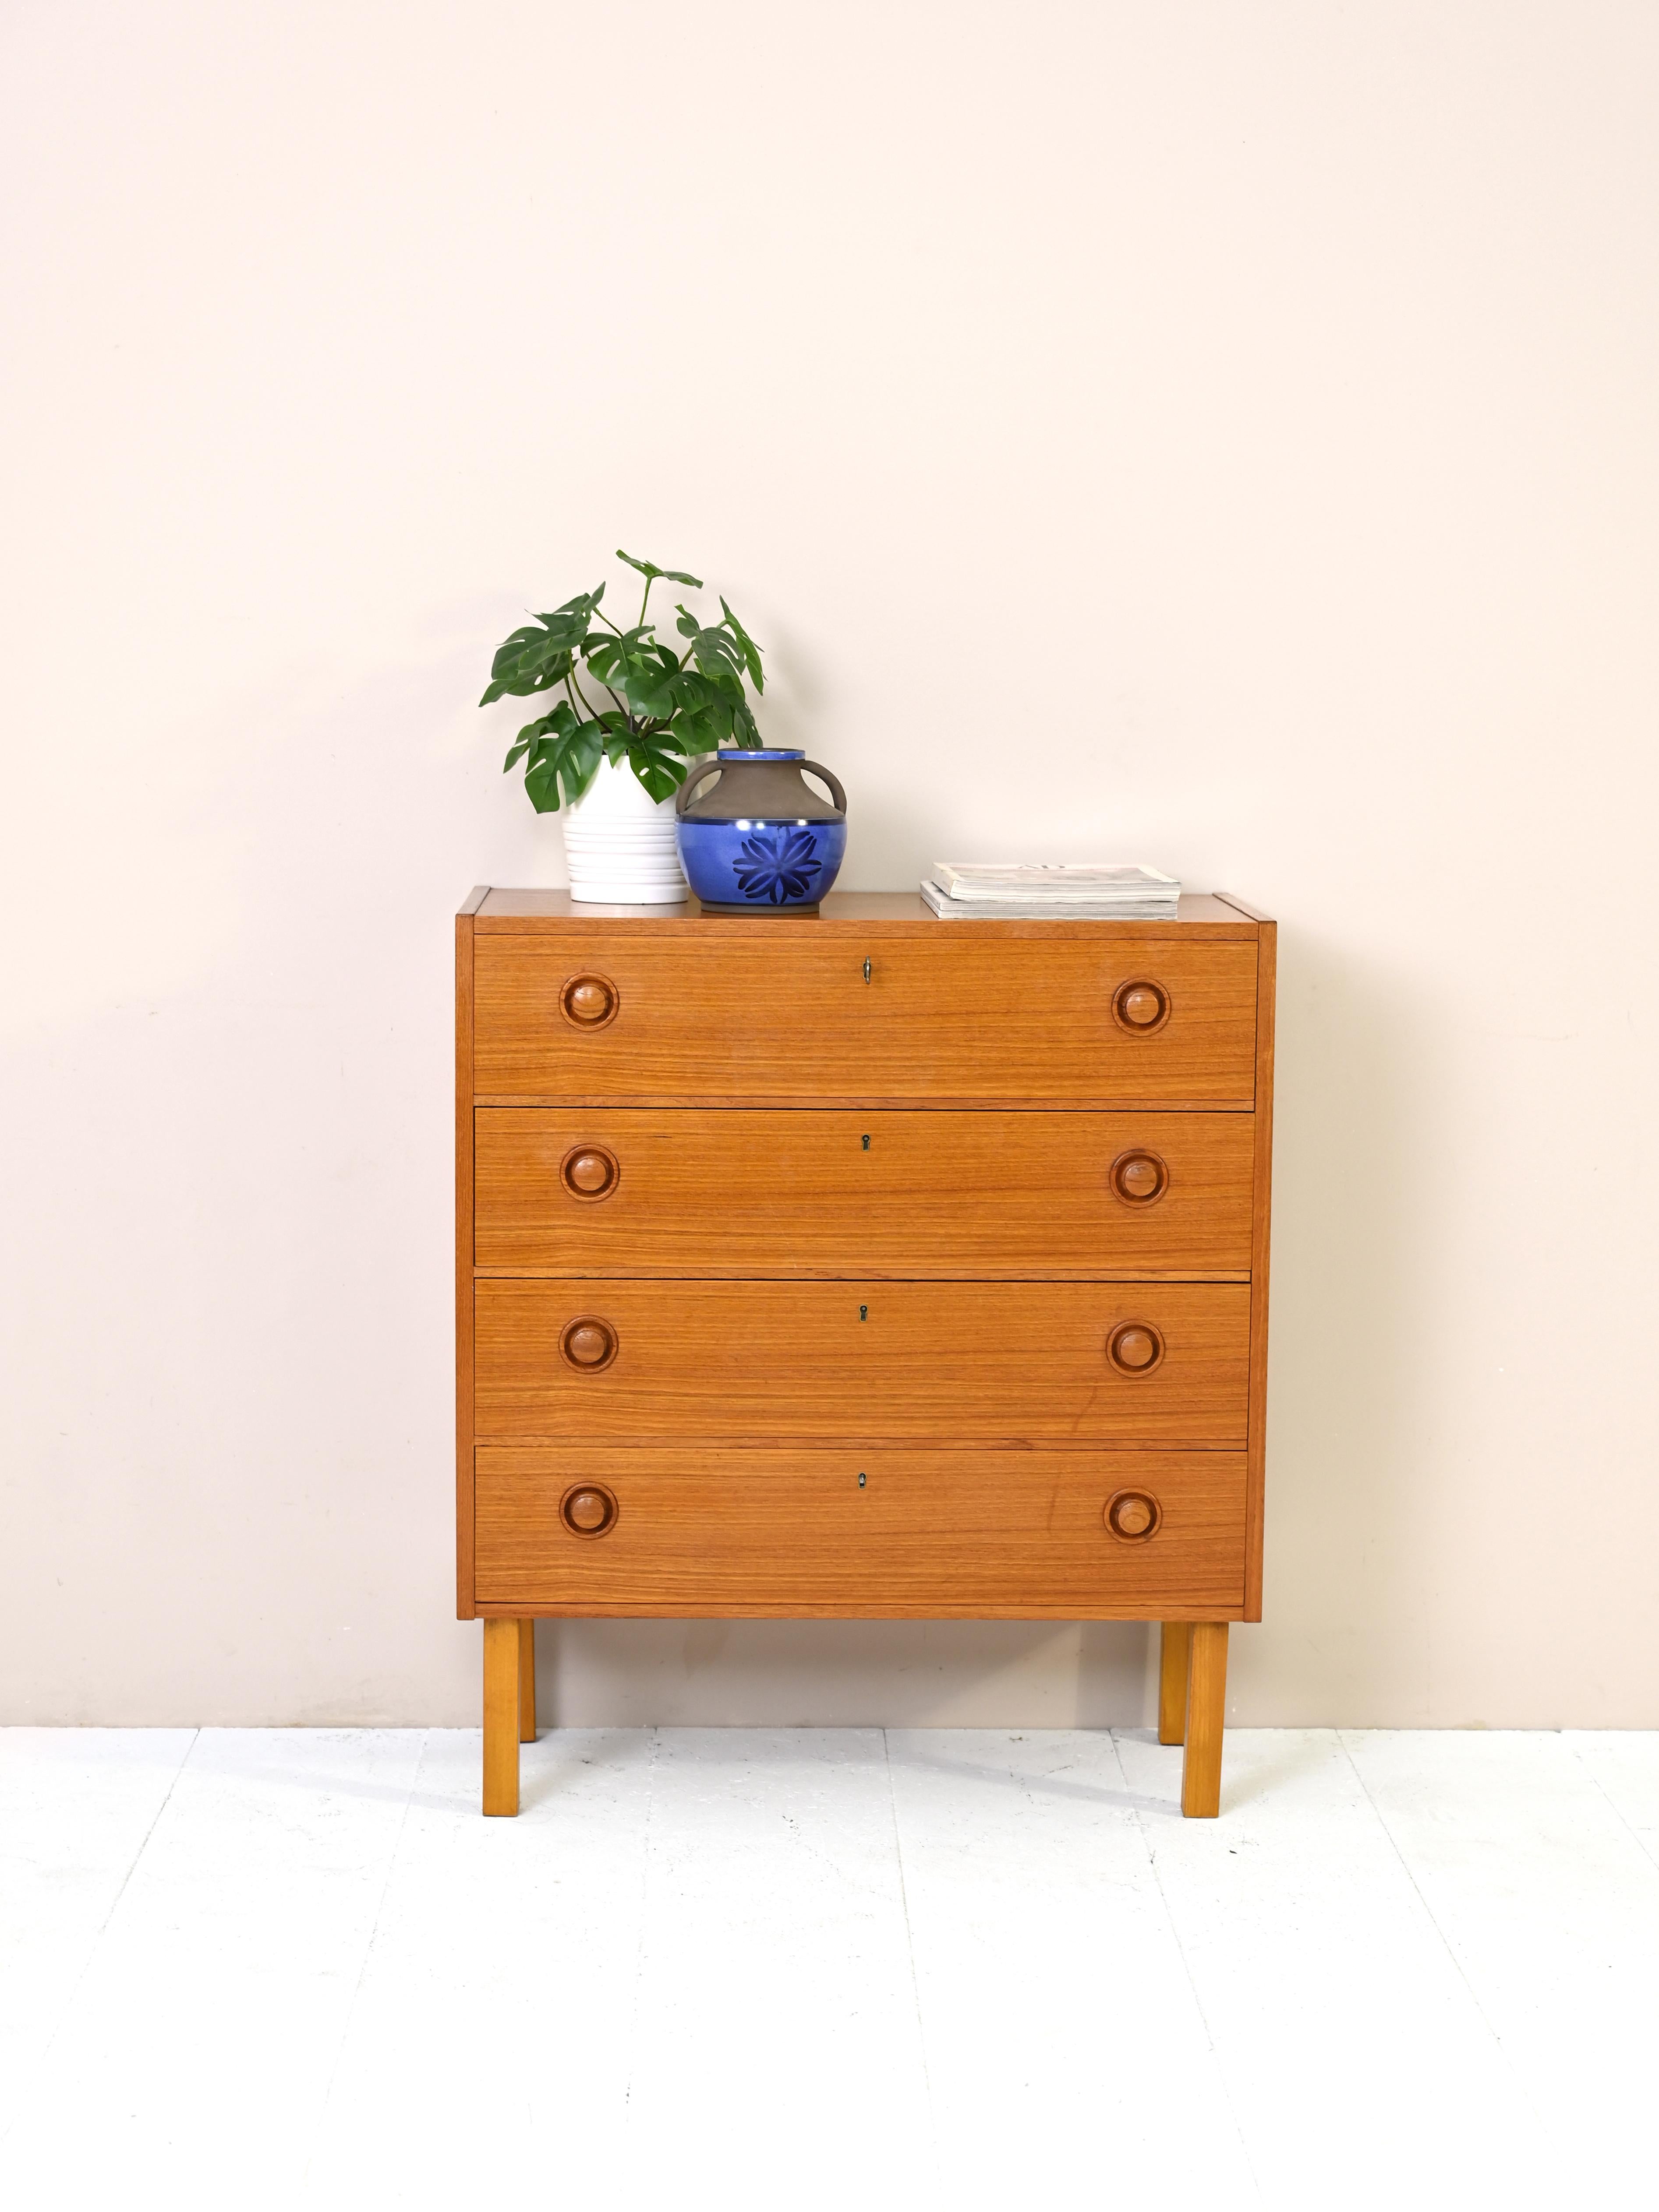 Scandinavian cabinet with 4 lockable drawers.
A modern piece characterized by square lines in the amber color of teak wood.
The round handle of the drawers embellishes the structure.
Good condition. A conservative restoration with products of